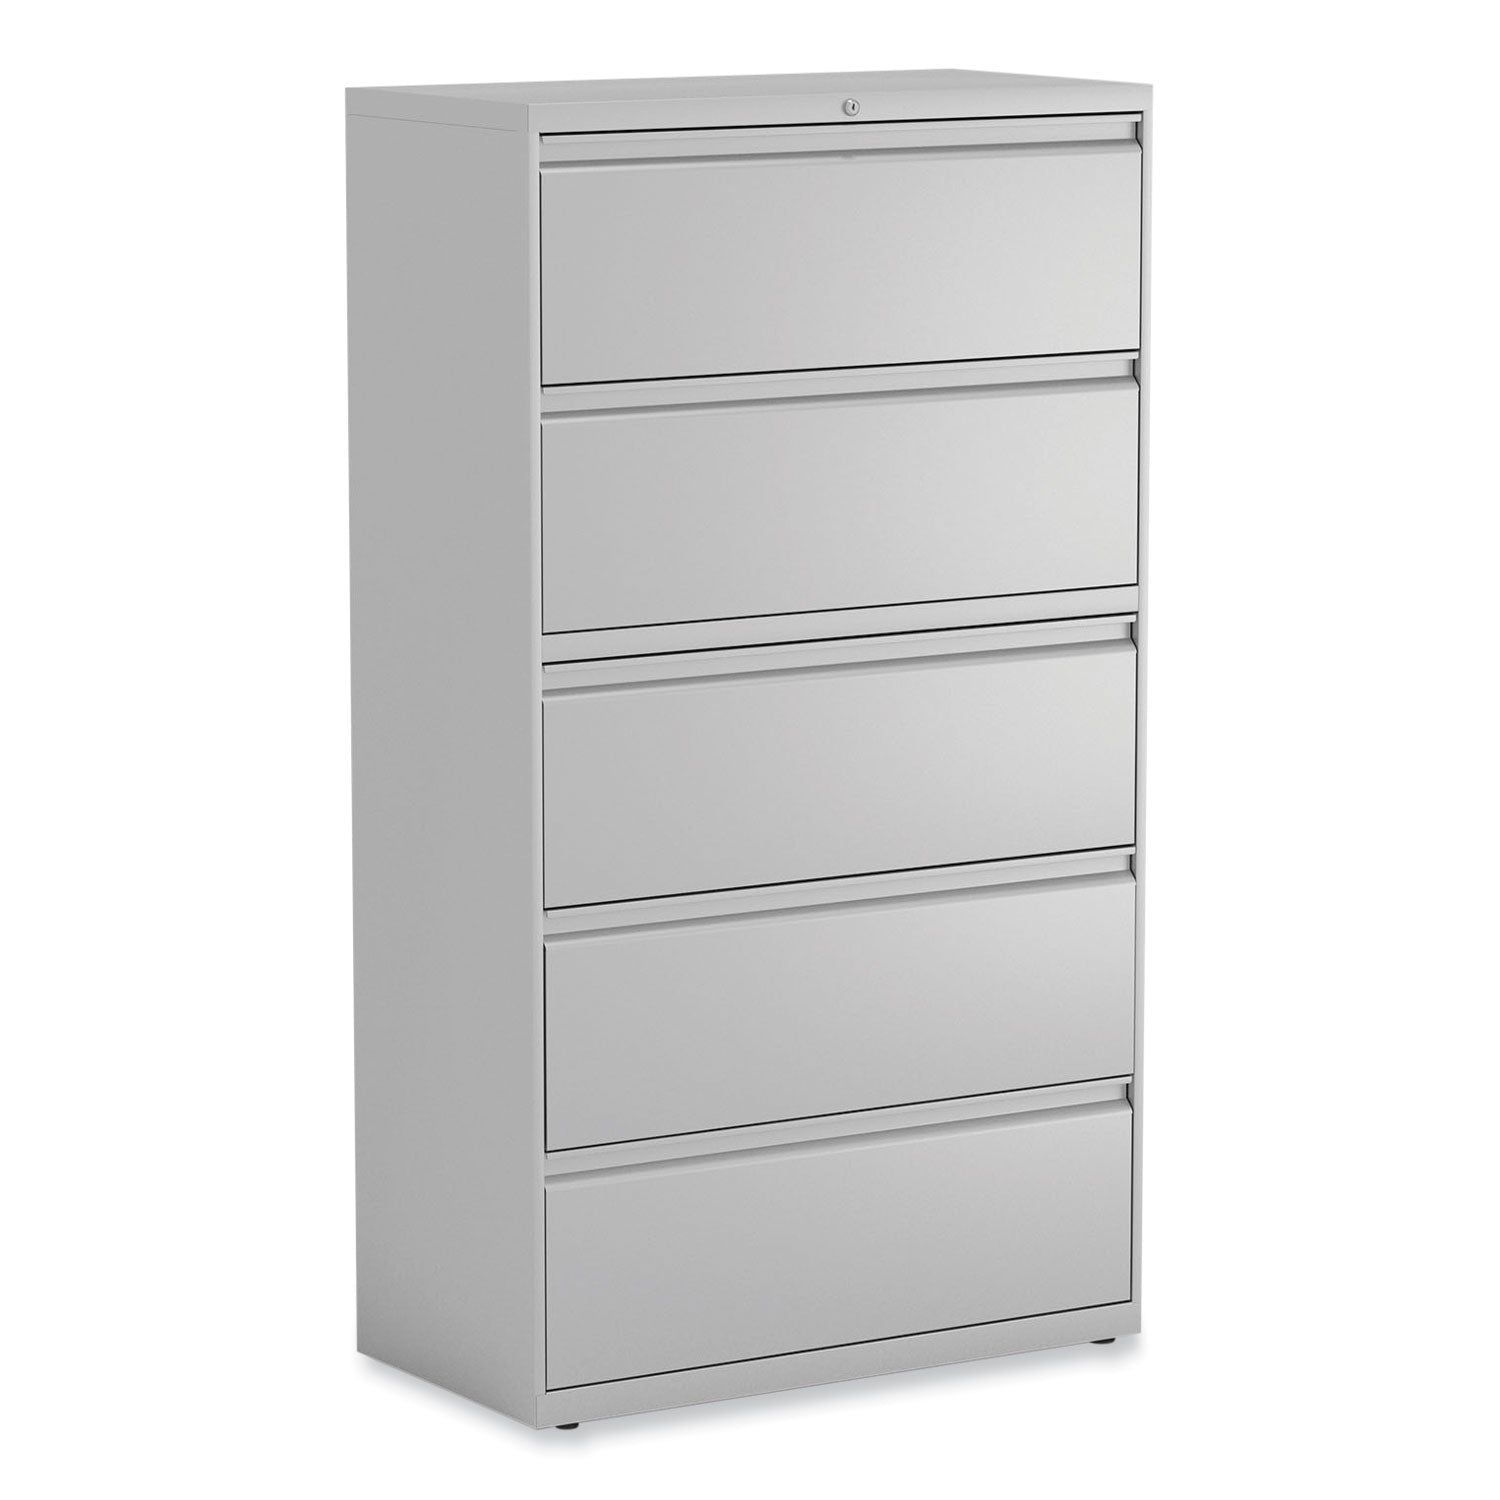 lateral-file-5-legal-letter-a4-a5-size-file-drawers-light-gray-36-x-1863-x-6763_alehlf3667lg - 1